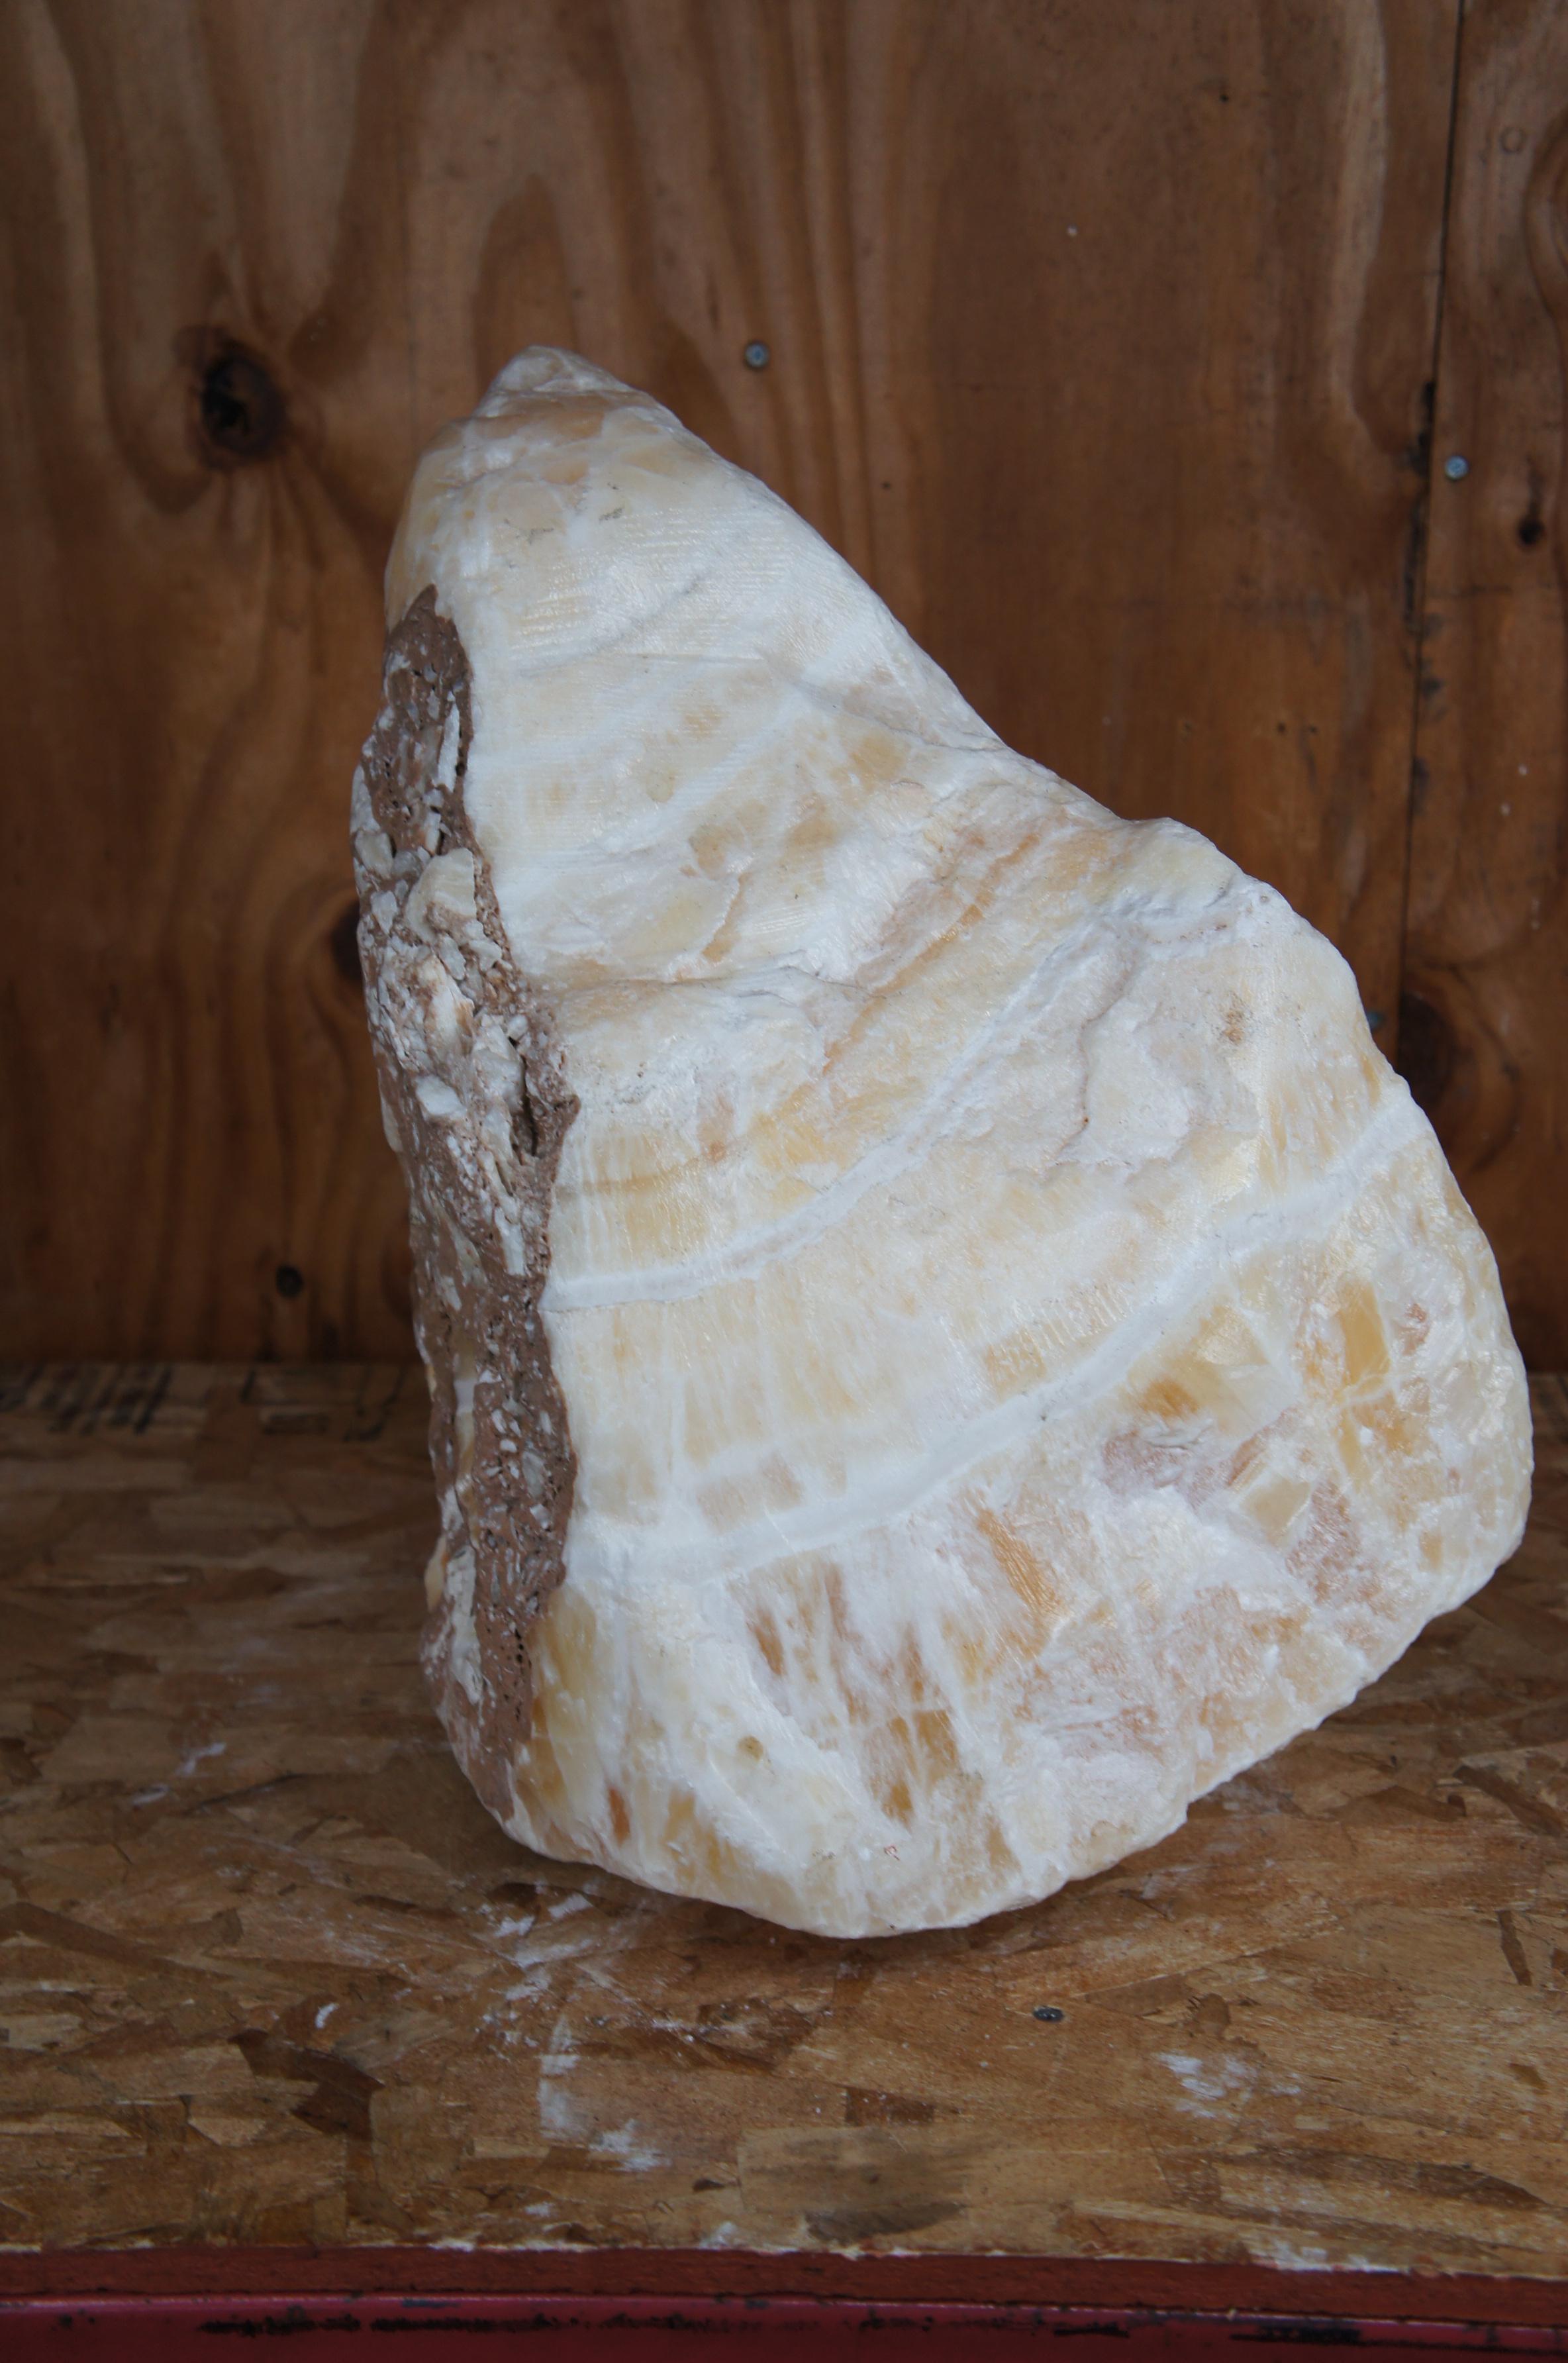 Primitive 102lb Honeycomb Calcite Amber Onyx Rock Stone Crystal Formation Drilled Holes For Sale